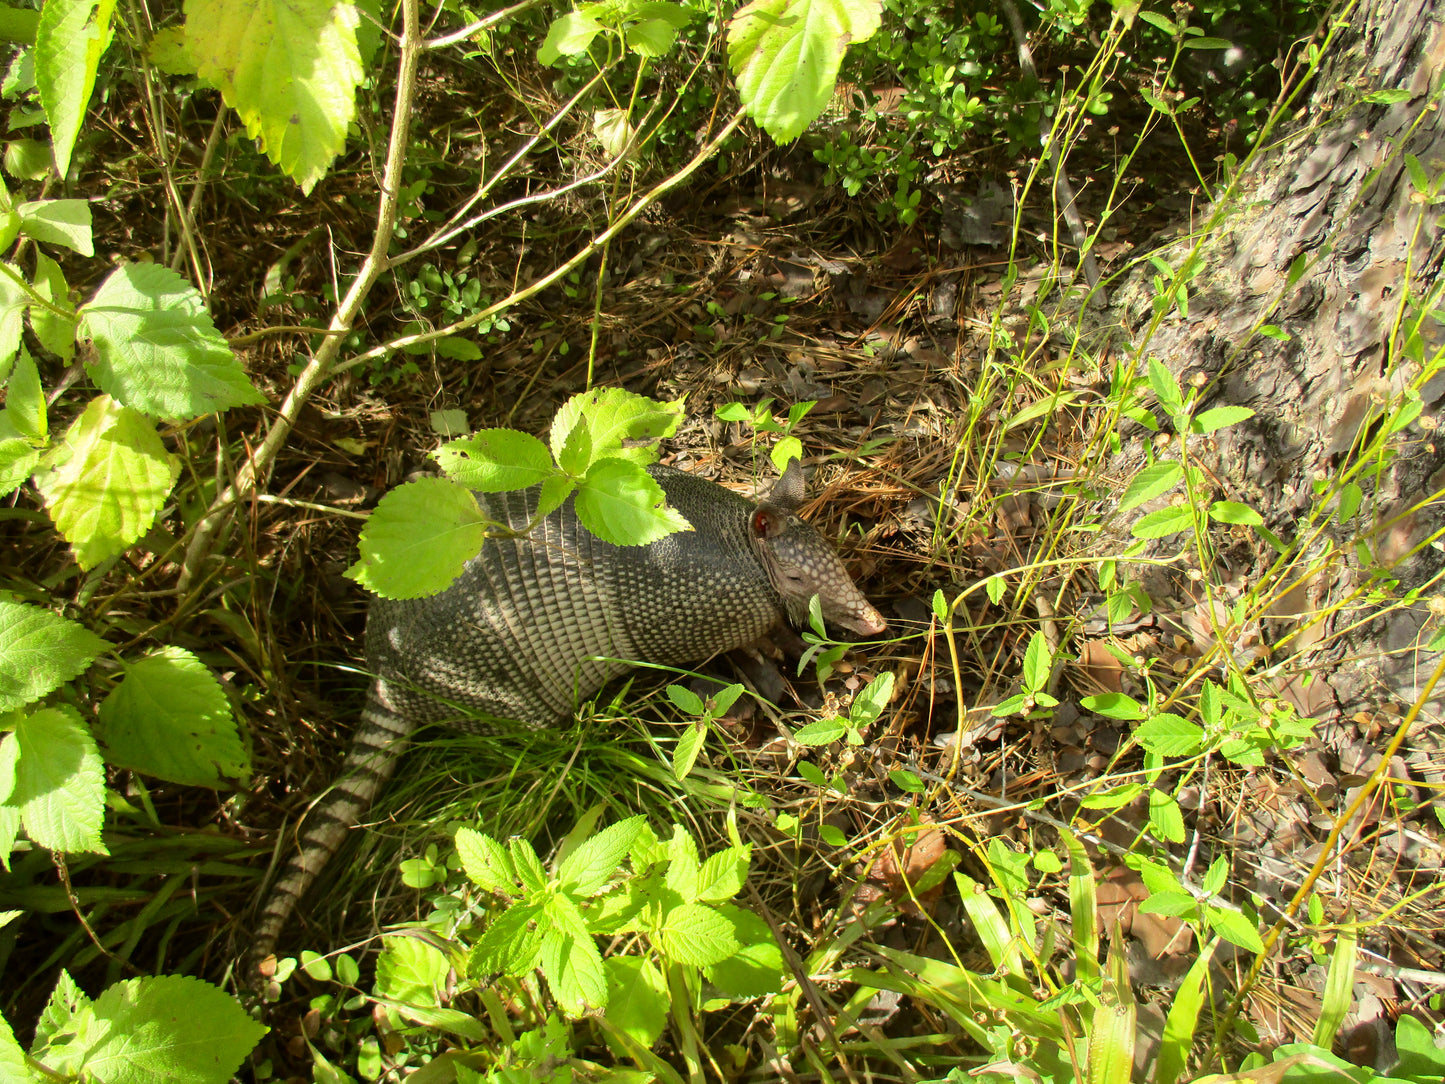 Photograph of Surrounds of An Armadillo